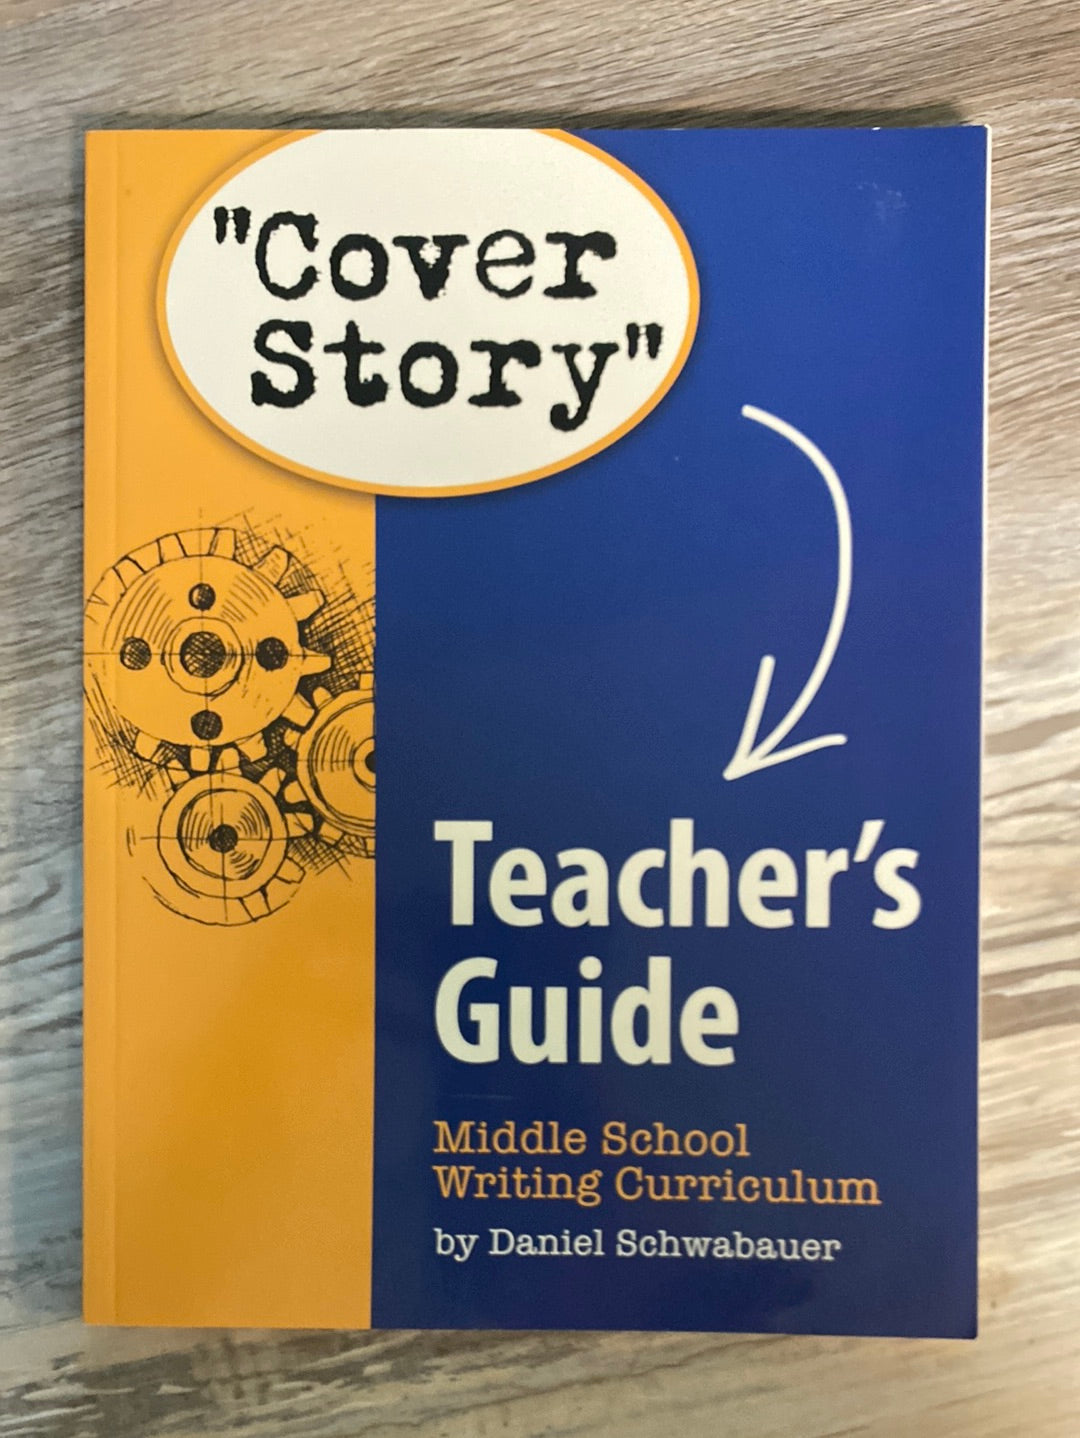 Cover Story Middle School Writing Curriculum (Teachers Guide) by Daniel Schwabauer